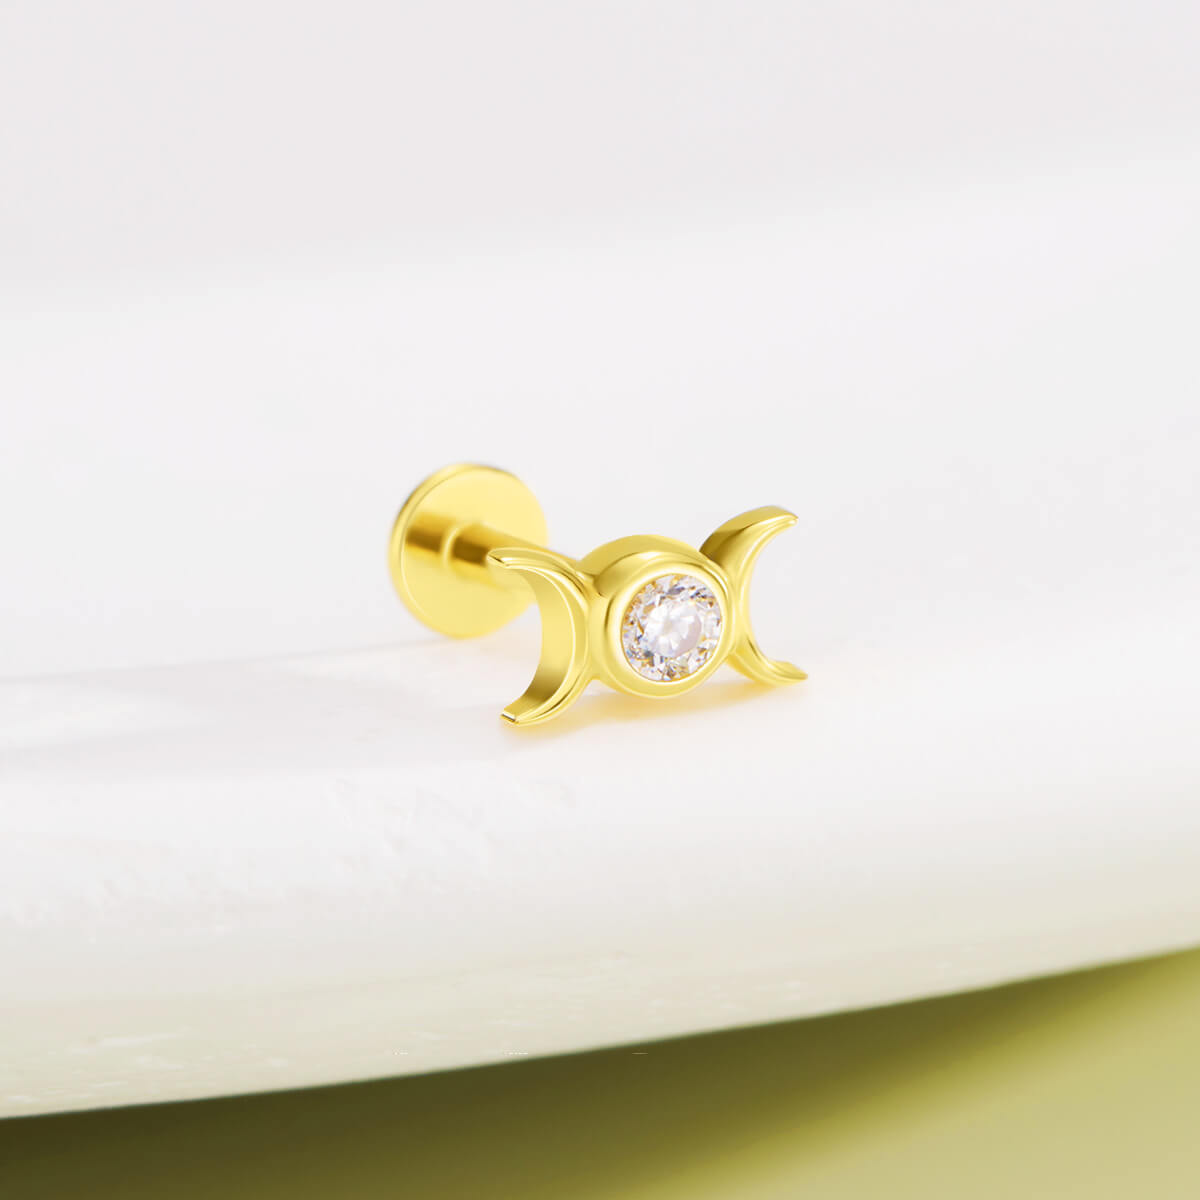 Gold Diamond Nose Pin in Bangalore at best price by Malabar Gold & Diamonds  - Justdial